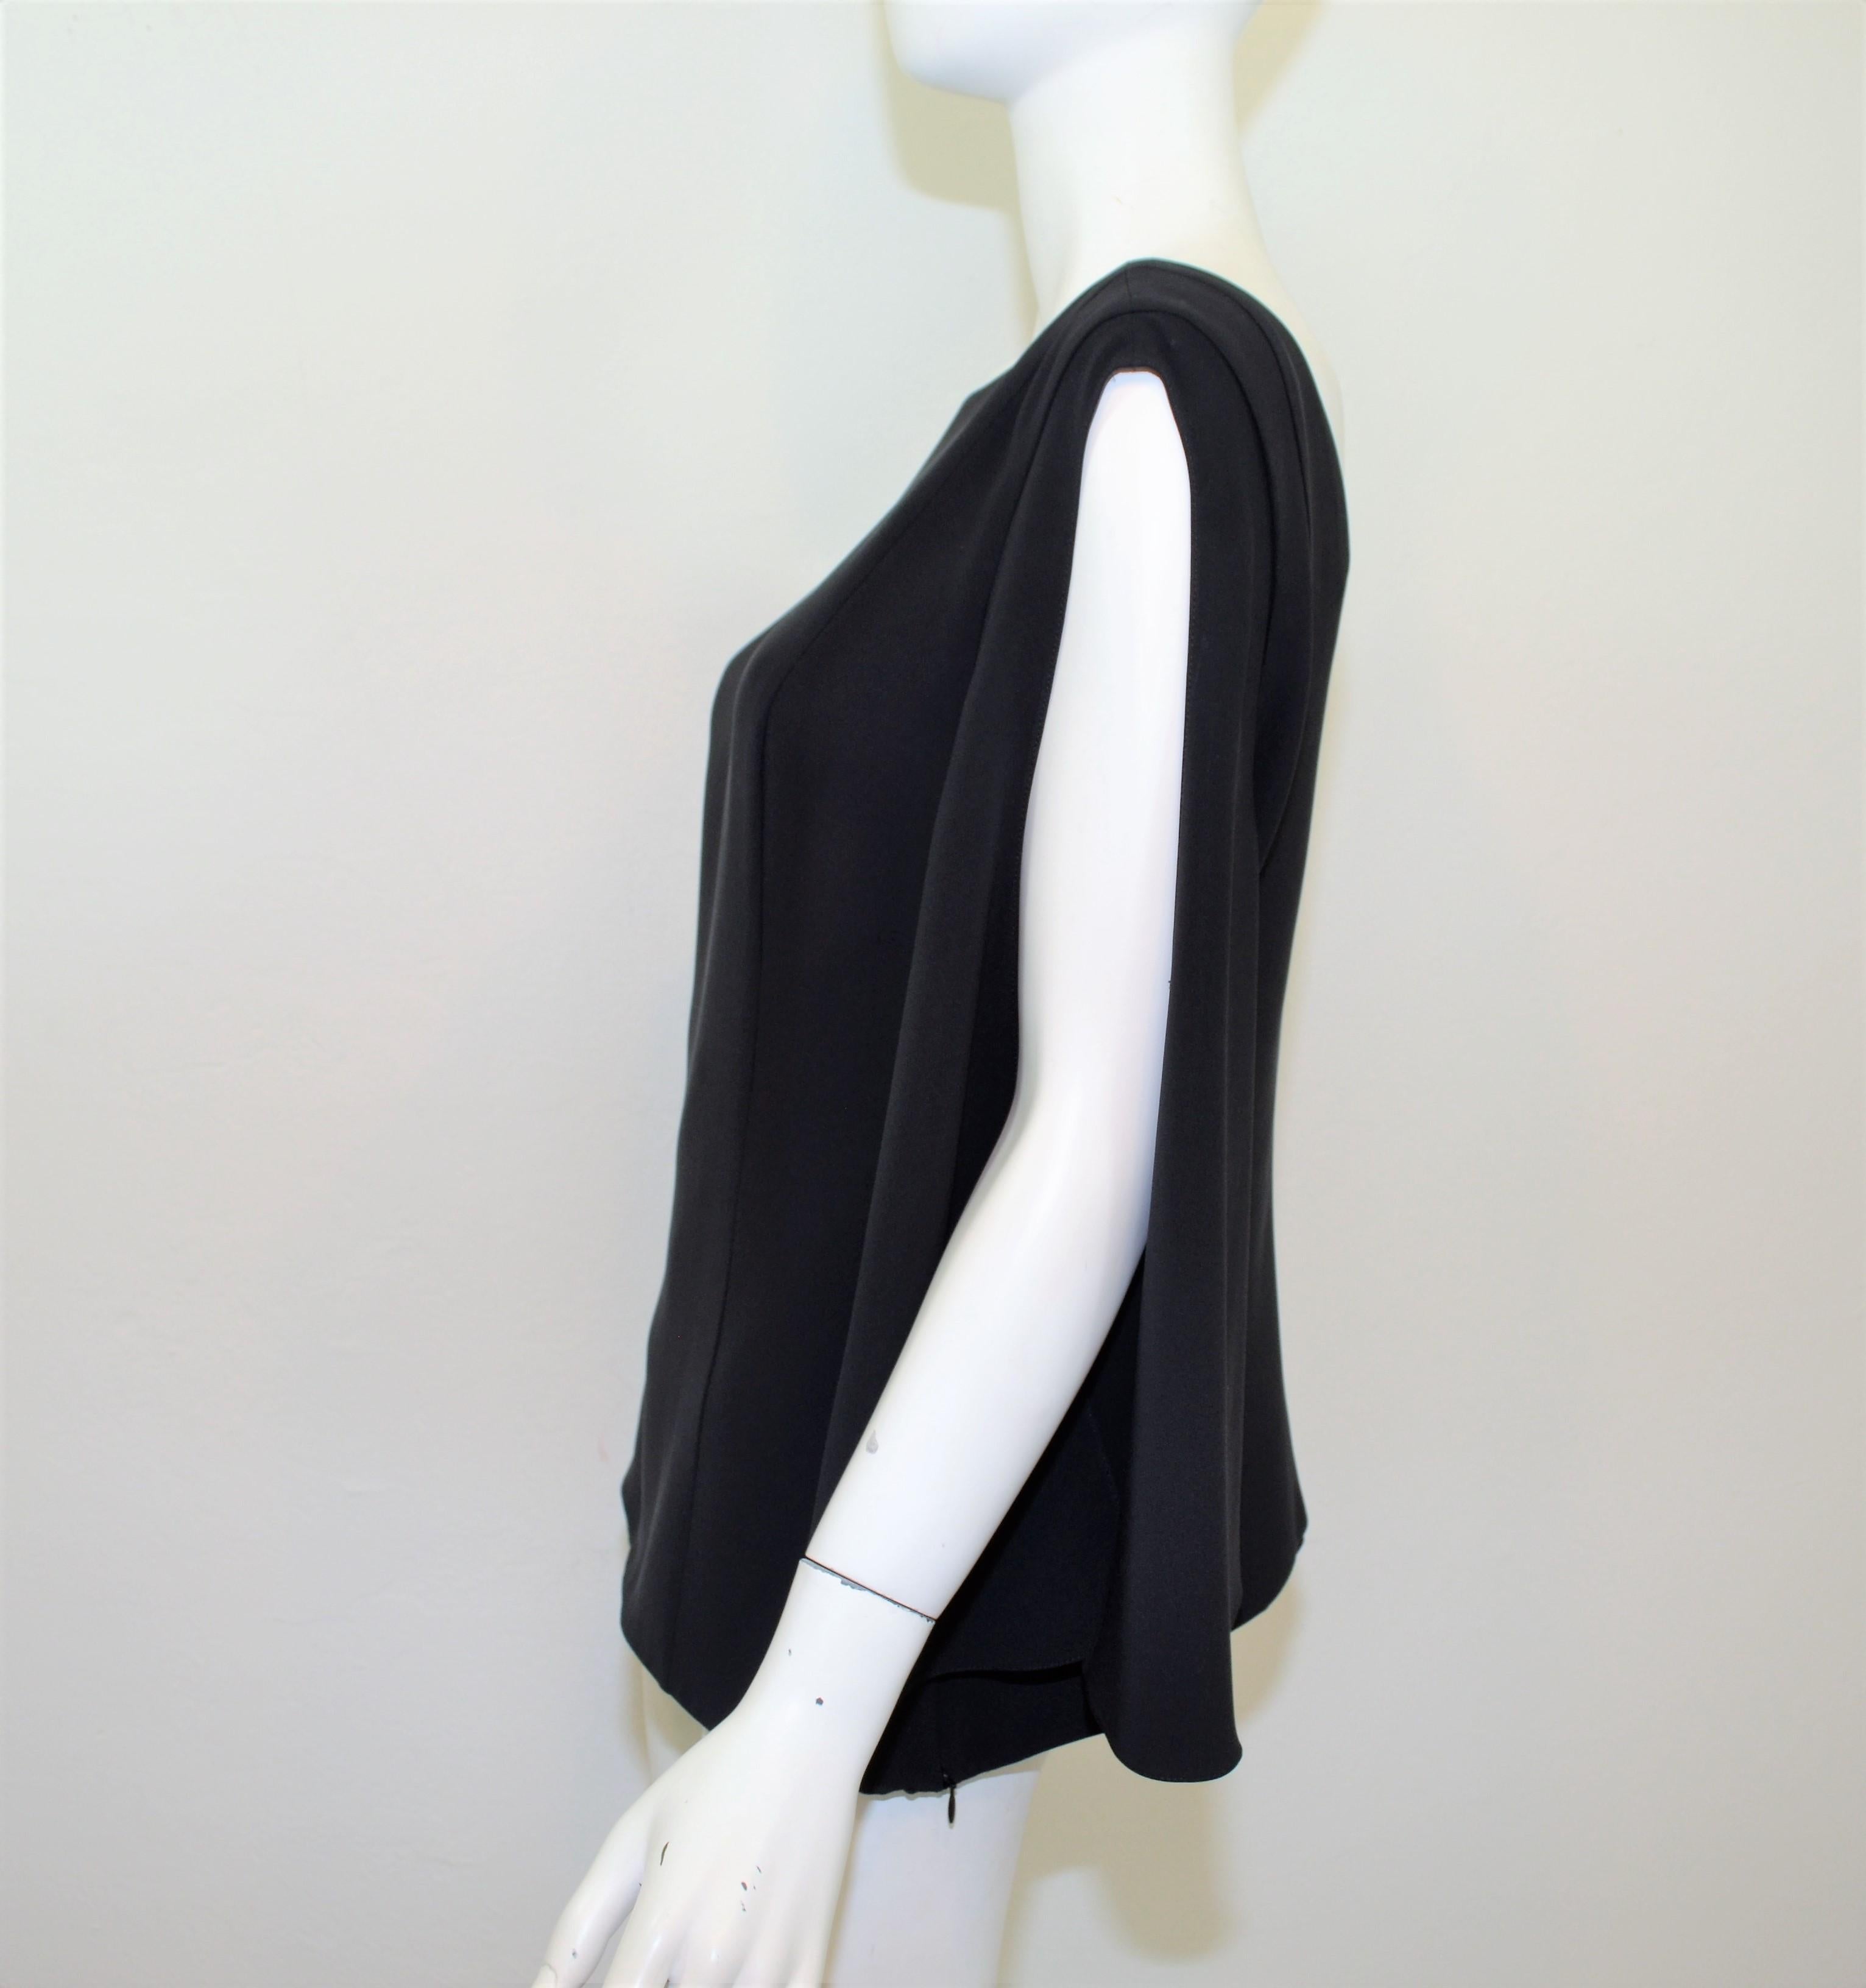 Christian Dior Blouse featured in black with draped, cut sleeves, a V-Cut back, and a concealed side zipper fastening in size 12. Blouse is made in Italy, composed with 100% silk. 

Measurements:
Bust 38''
Sleeves 21'' 
Length 16''